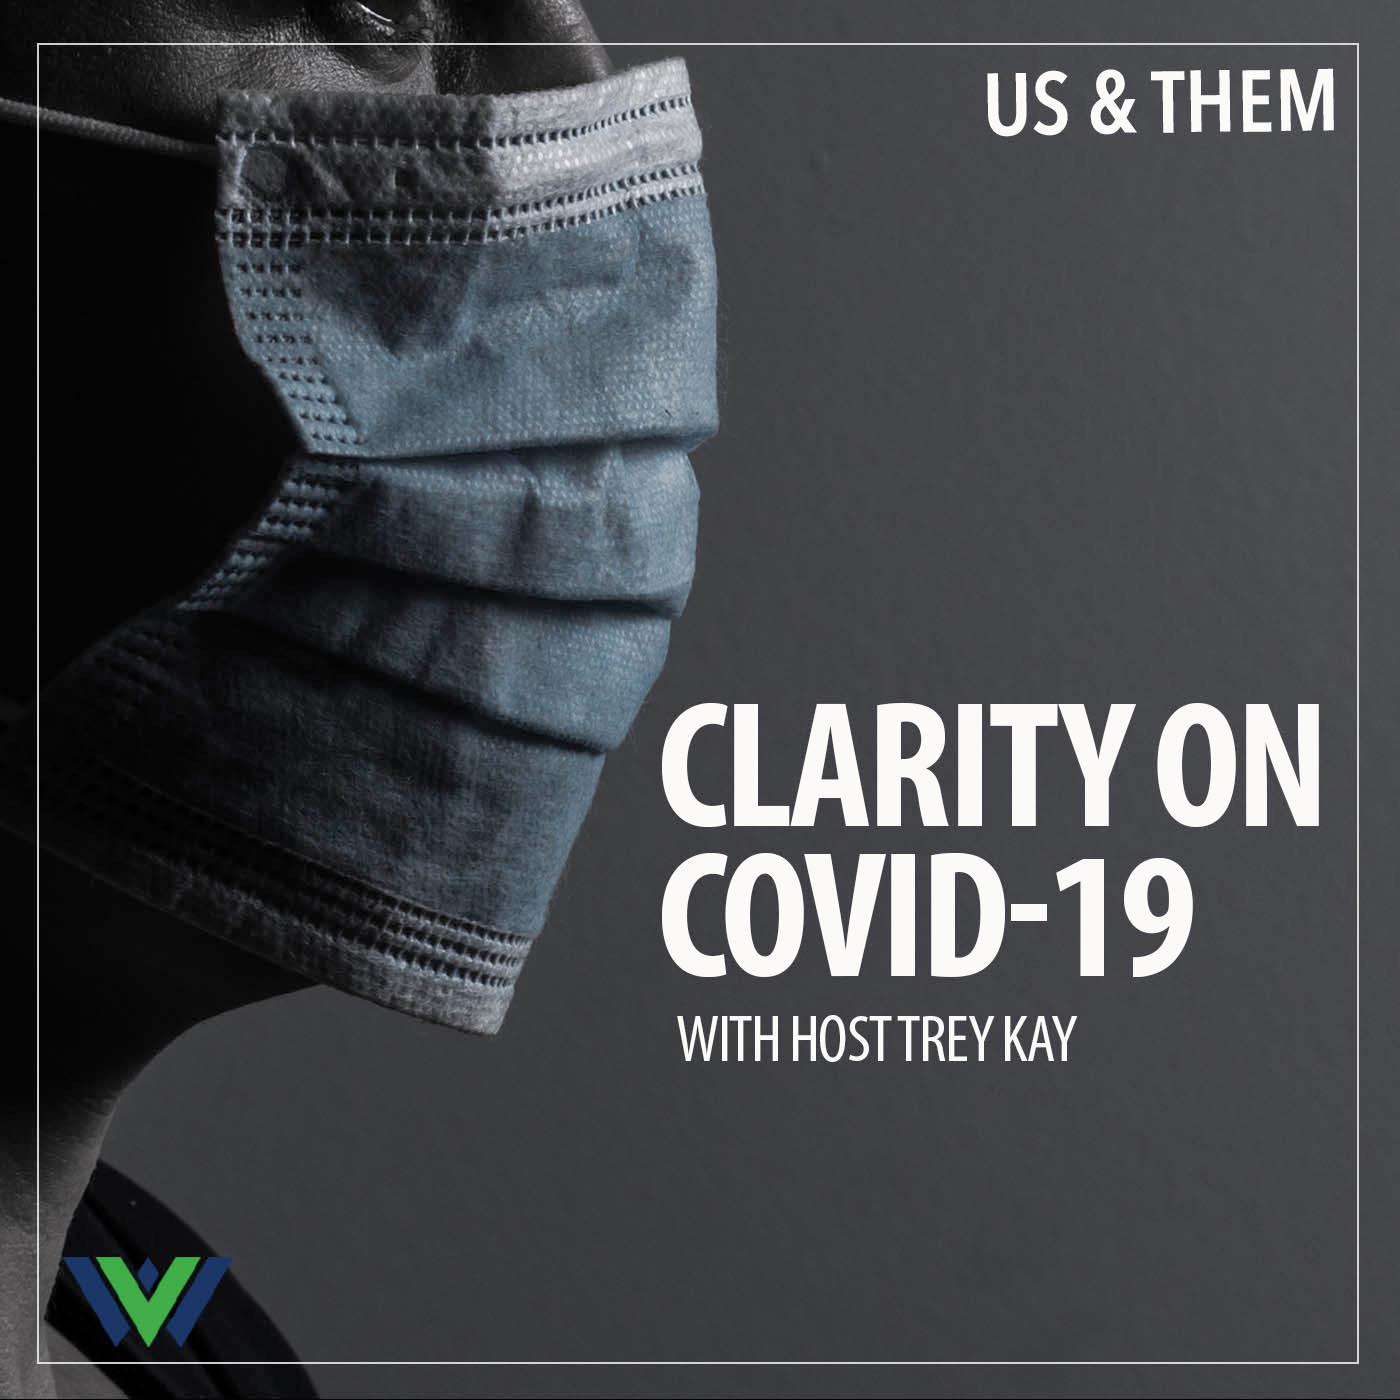 Thumbnail for "Clarity on COVID-19".